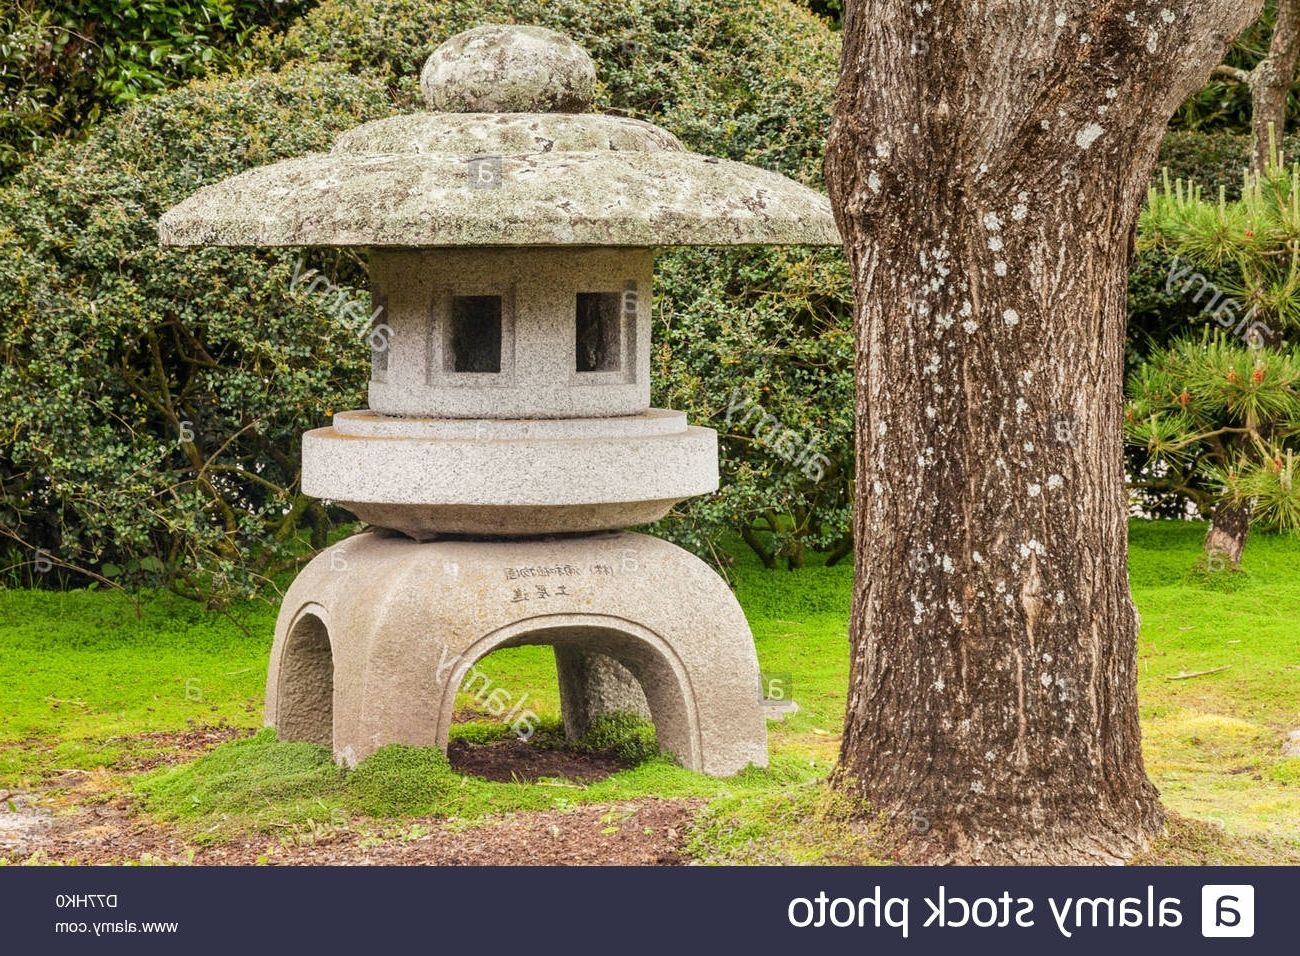 Outdoor Japanese Lanterns For Sale Inside 2019 Japanese Stone Garden Lanterns For Sale Uk Statues Sculpture Outdoor (View 2 of 20)